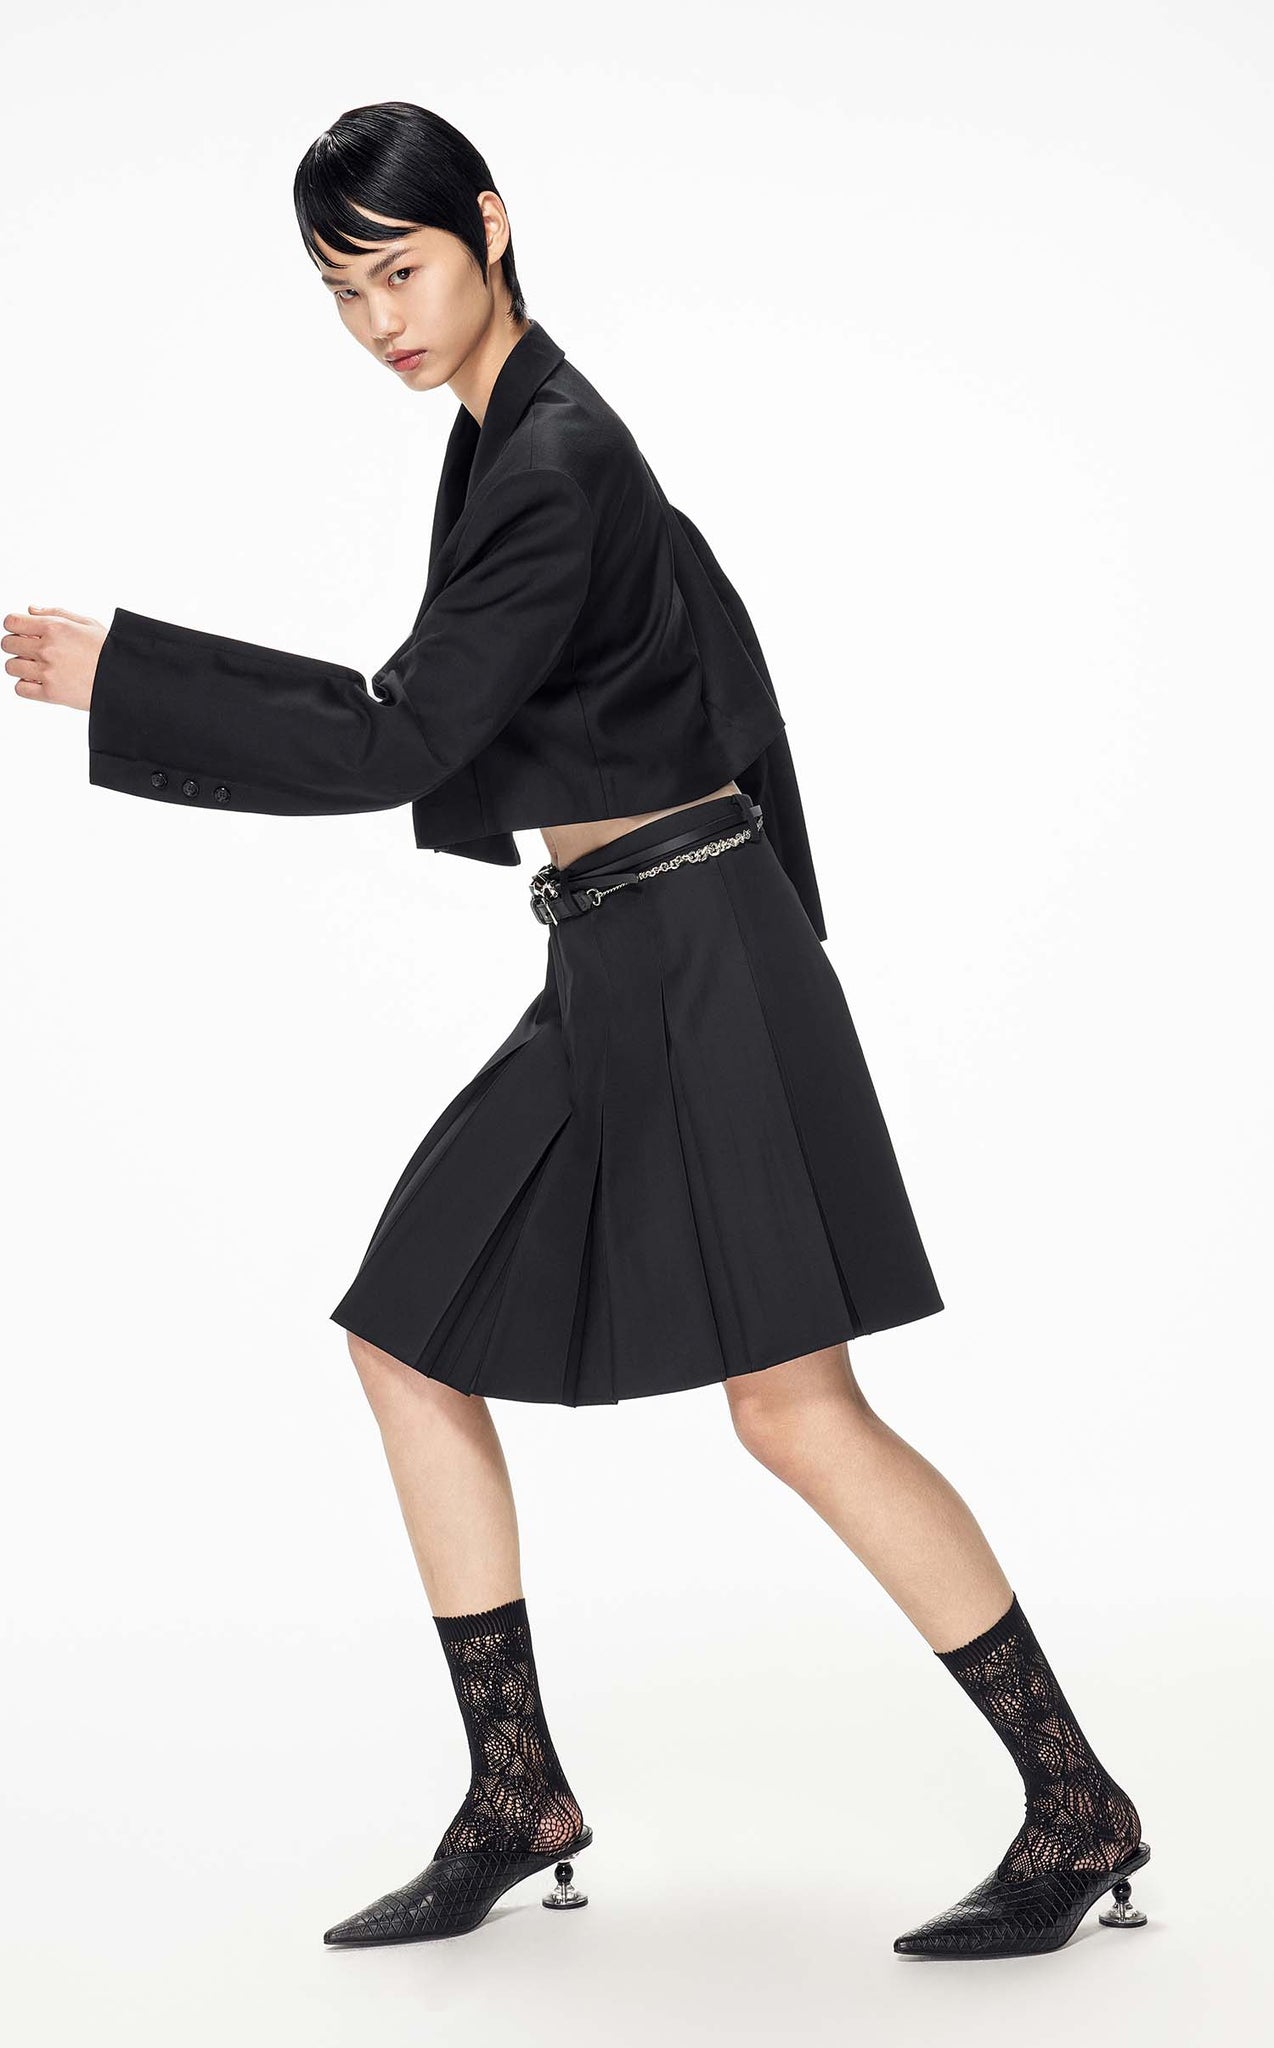 Skirts / JNBY A-Line Pleated Skirt (22% Sheep Wool)